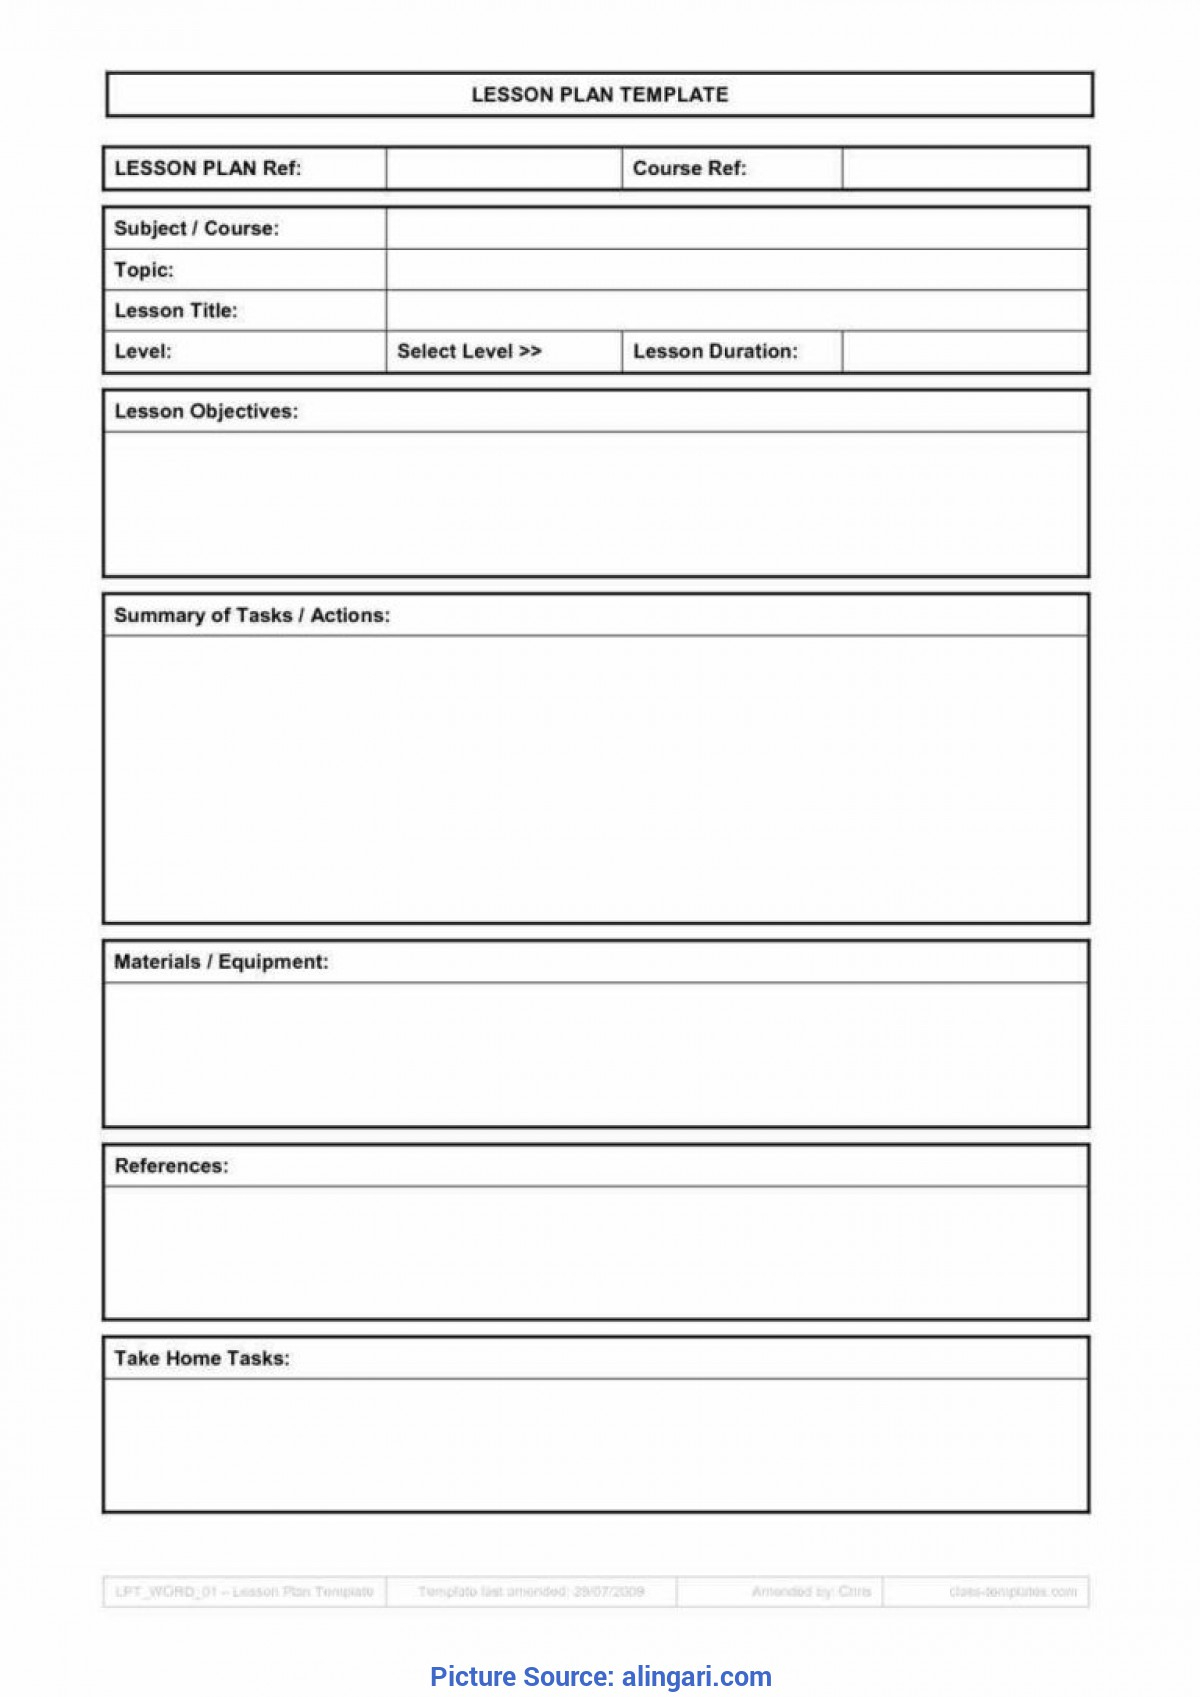 Prince2 Lessons Learned Report Template New 5 Lessons Le Pertaining To Lessons Learnt Report Template